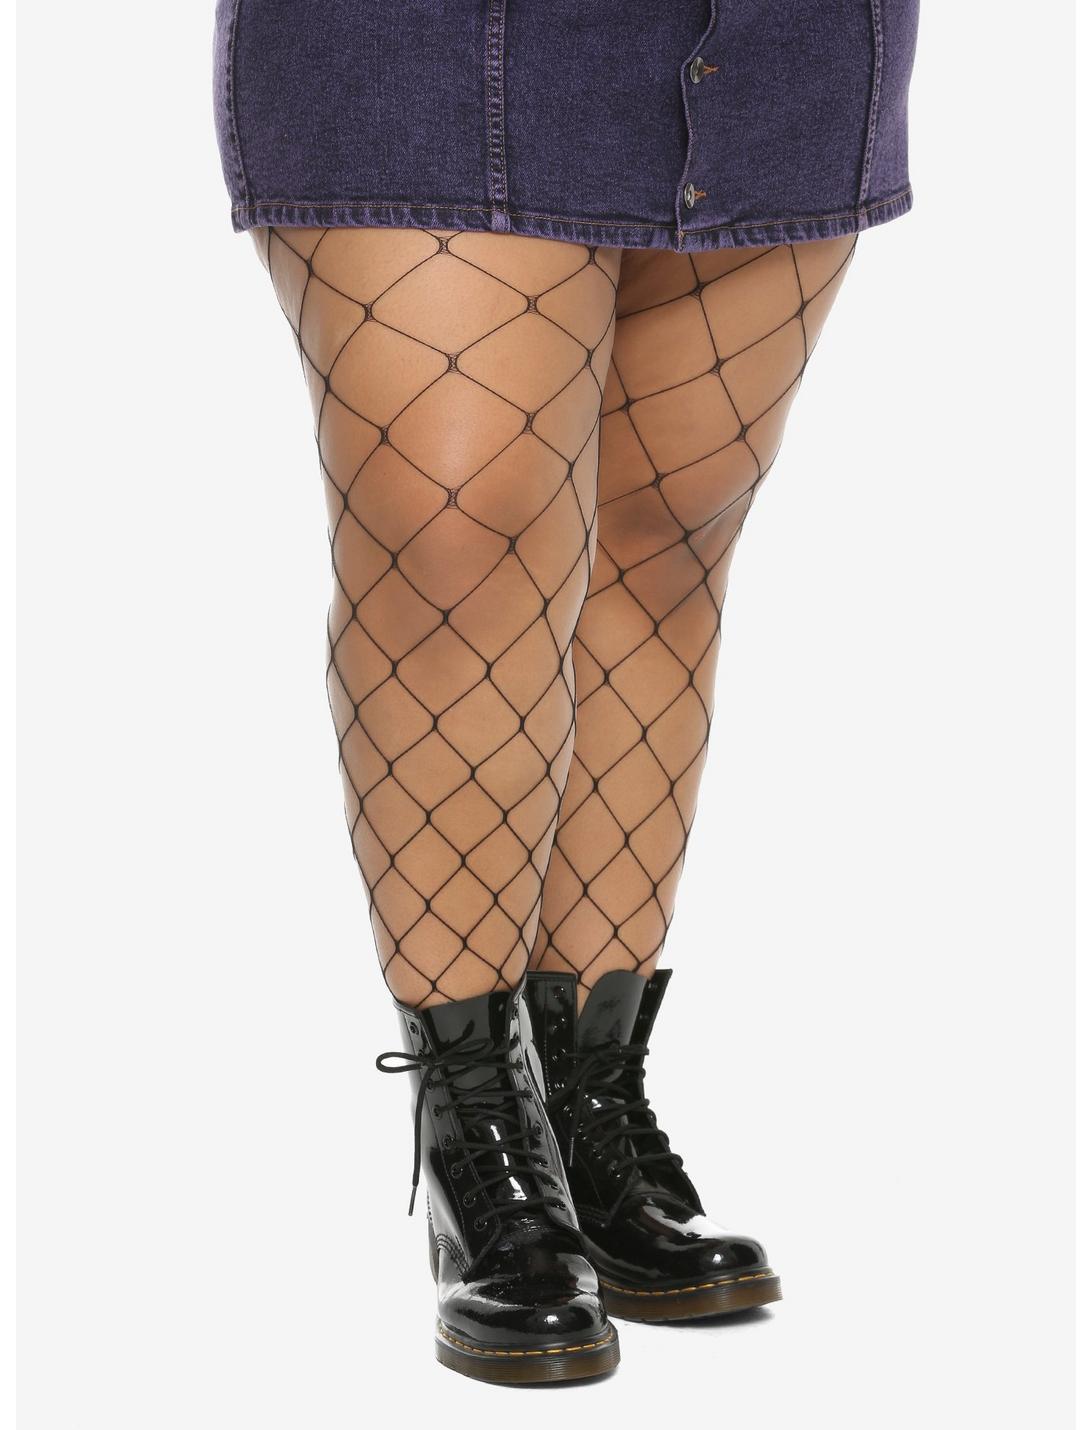 dondi smith recommends plus size fishnets pic